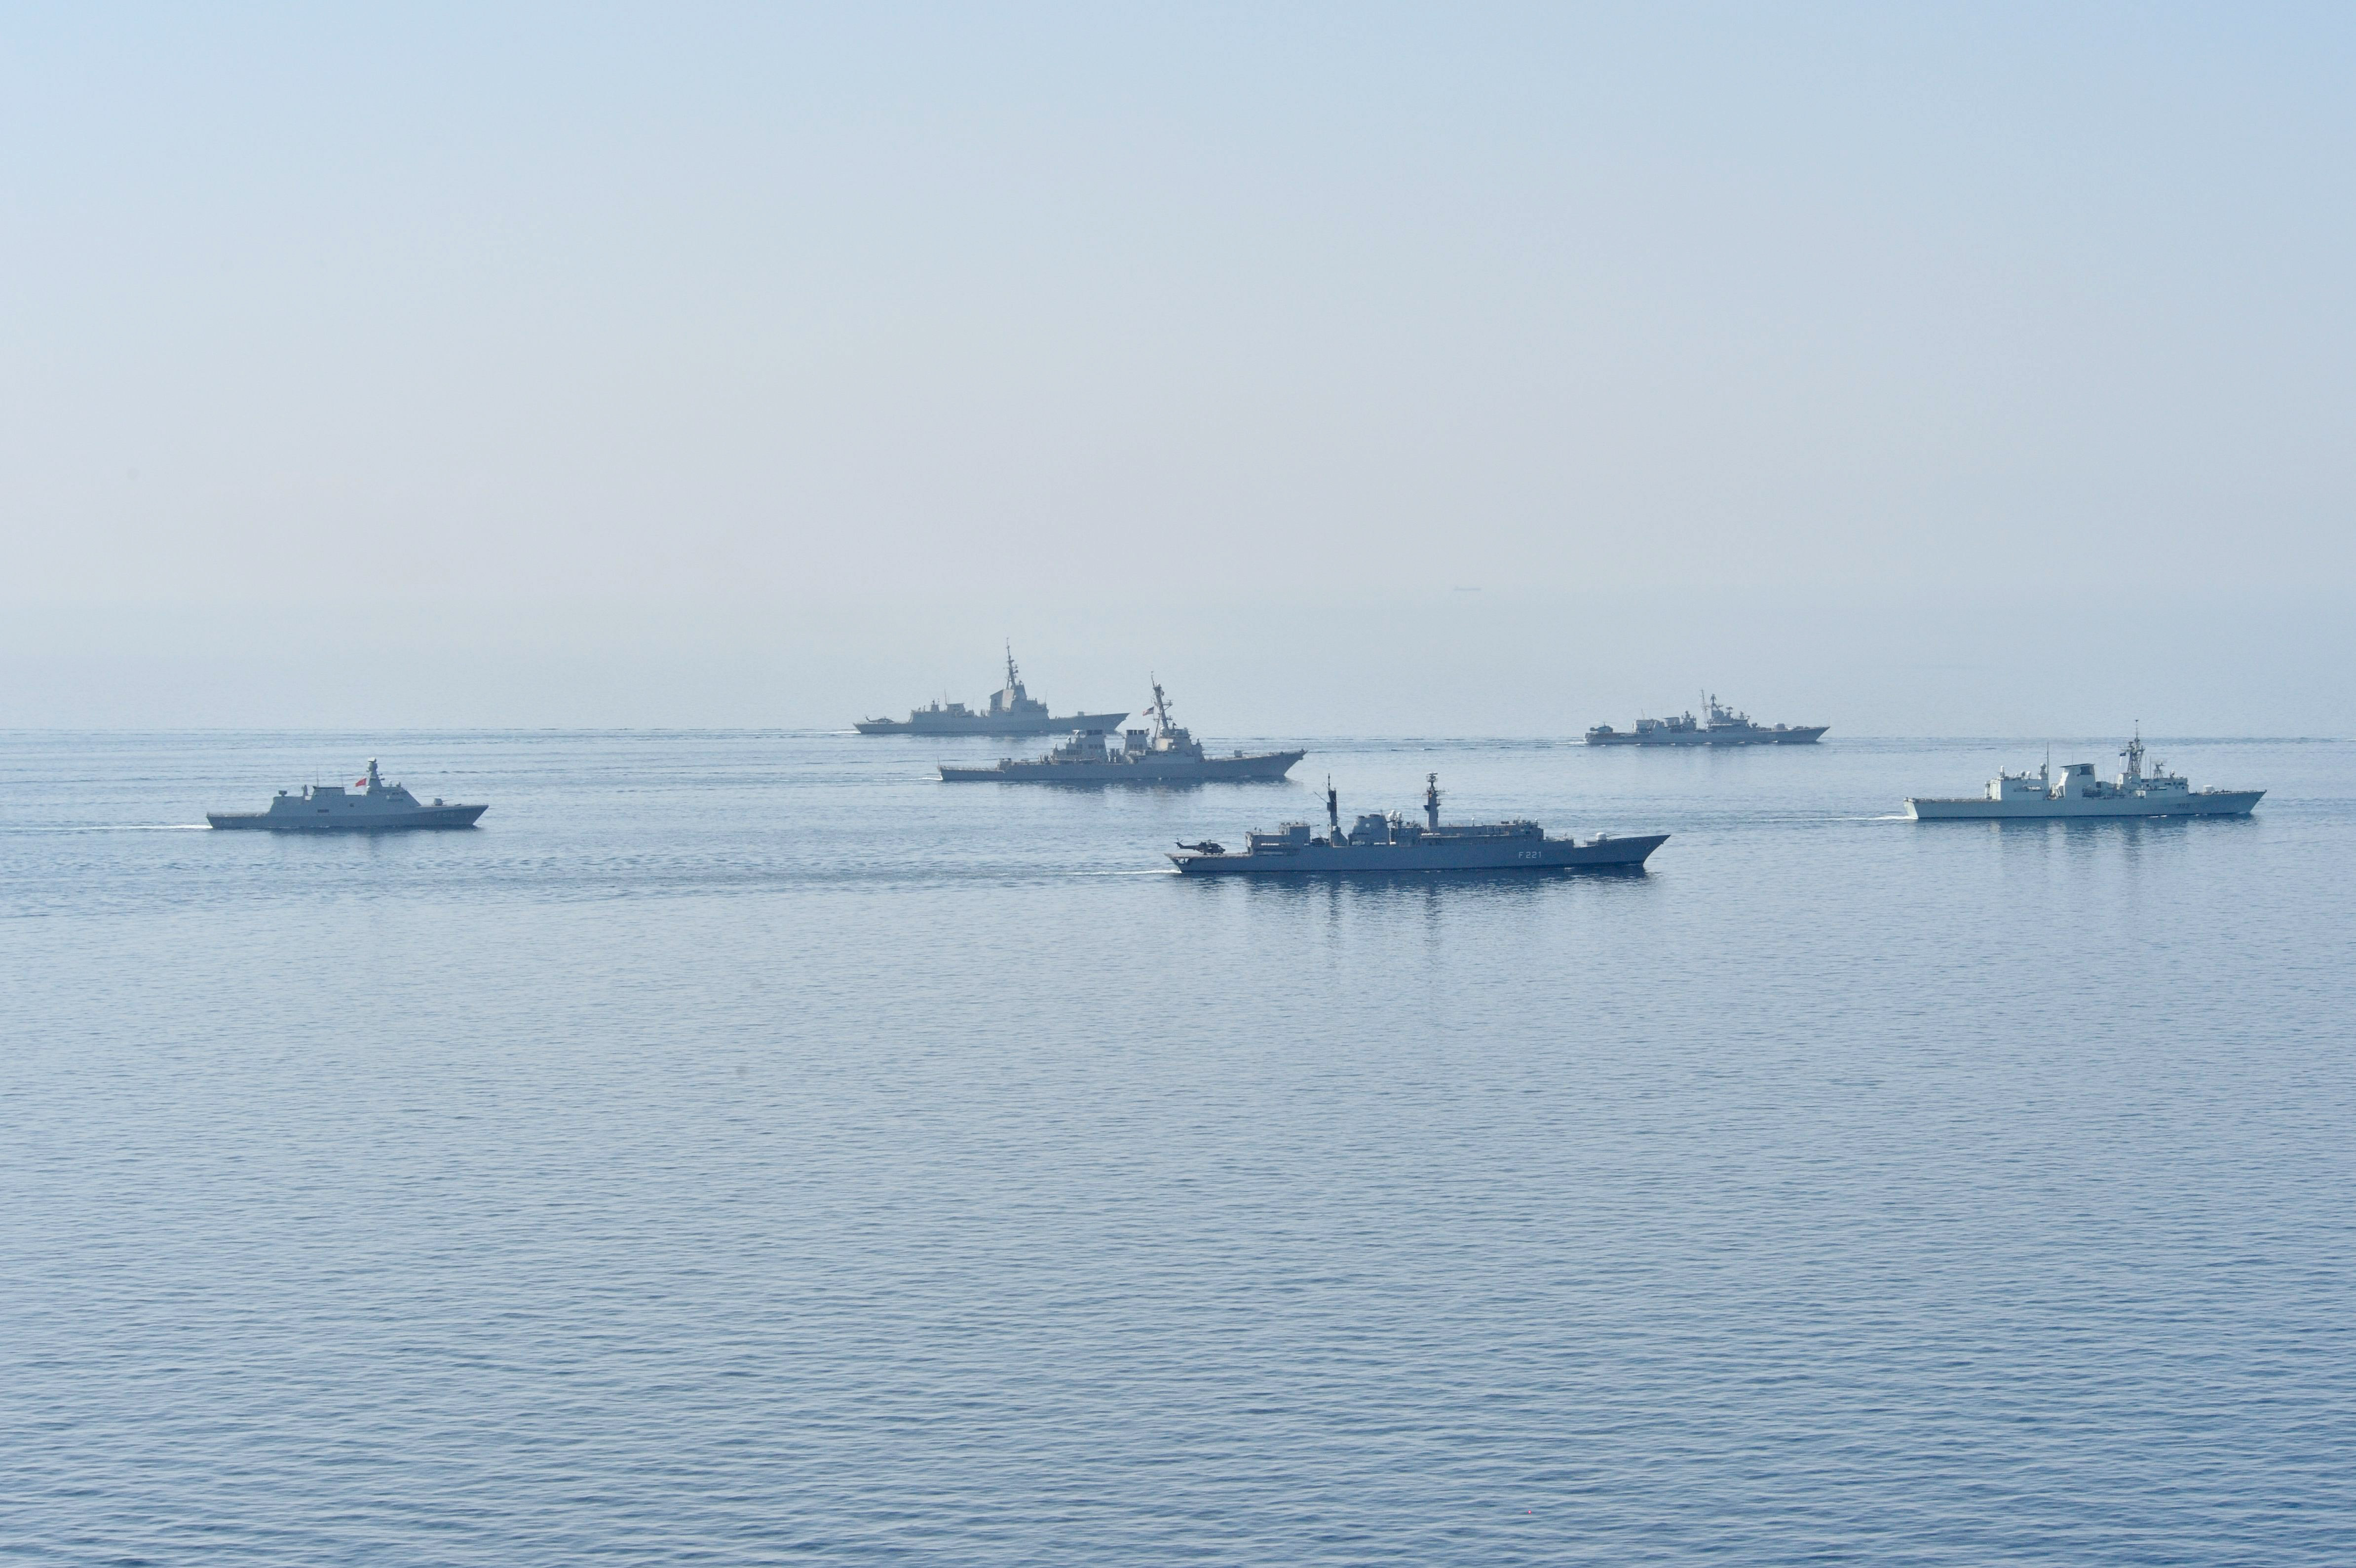 Ships from various countries are underway in formation during Sea Breeze 2014 in the Black Sea on Sept. 10. US Navy Photo